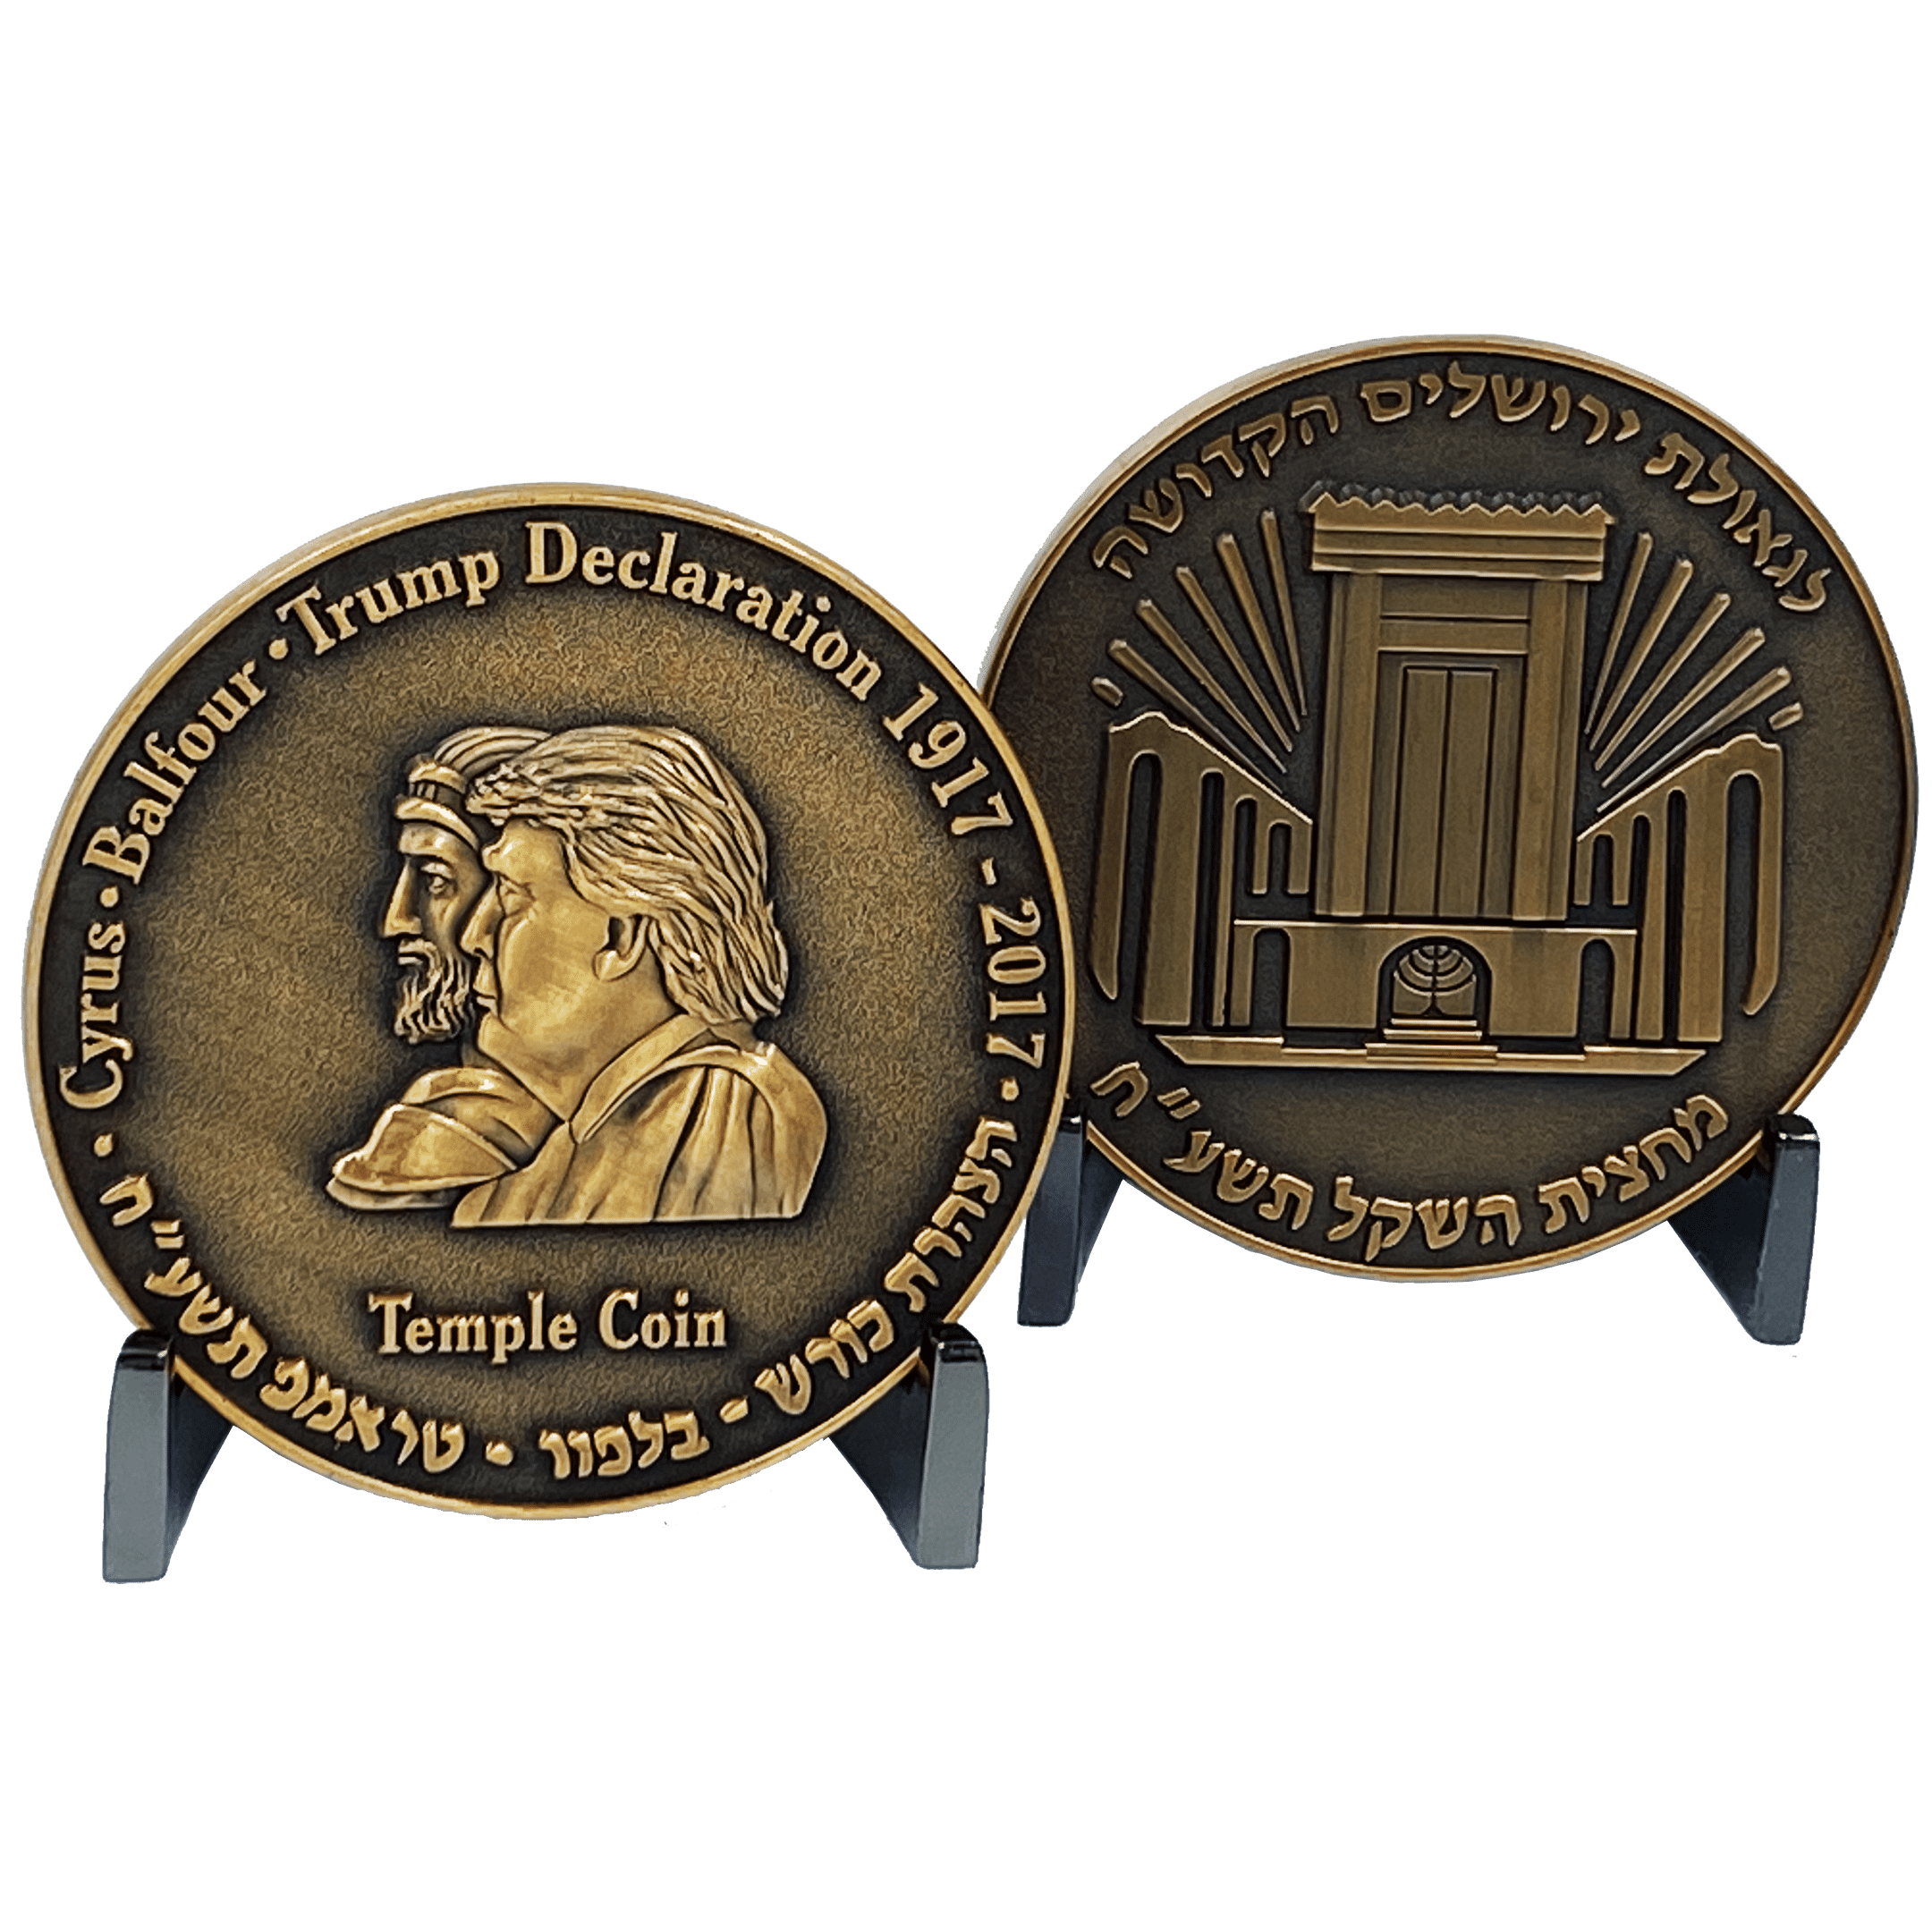 DL6-14 Rare Antique Gold Plated Half Shekel King Cyrus Donald Trump Jewish Temple Mount Israel Coin Israel Challenge Coin 